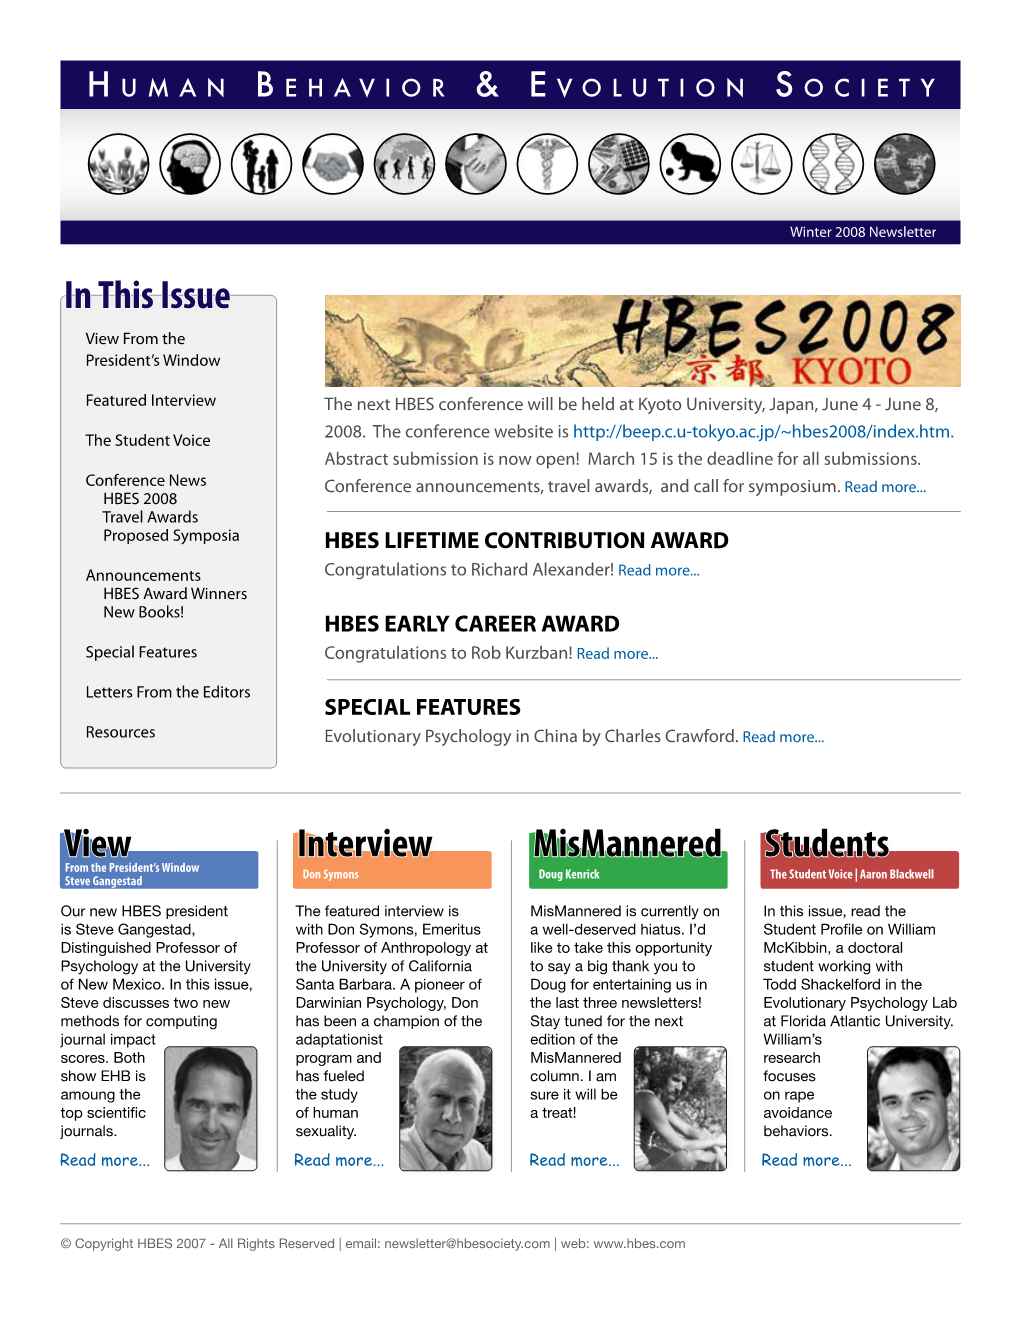 Download the Winter 2008 Newsletter